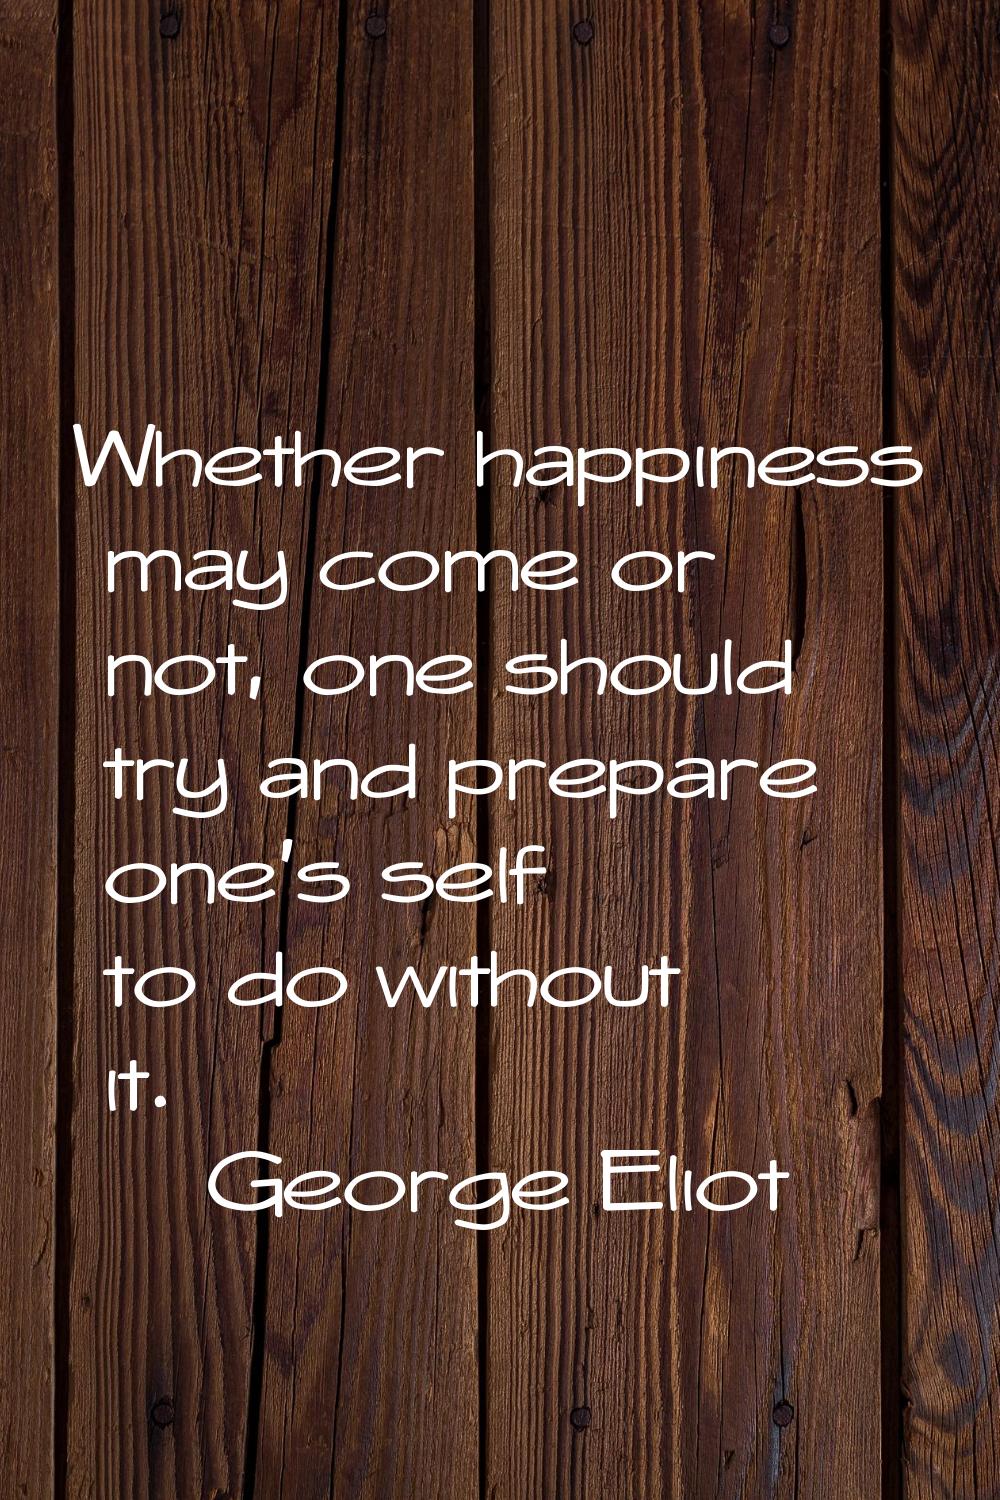 Whether happiness may come or not, one should try and prepare one's self to do without it.